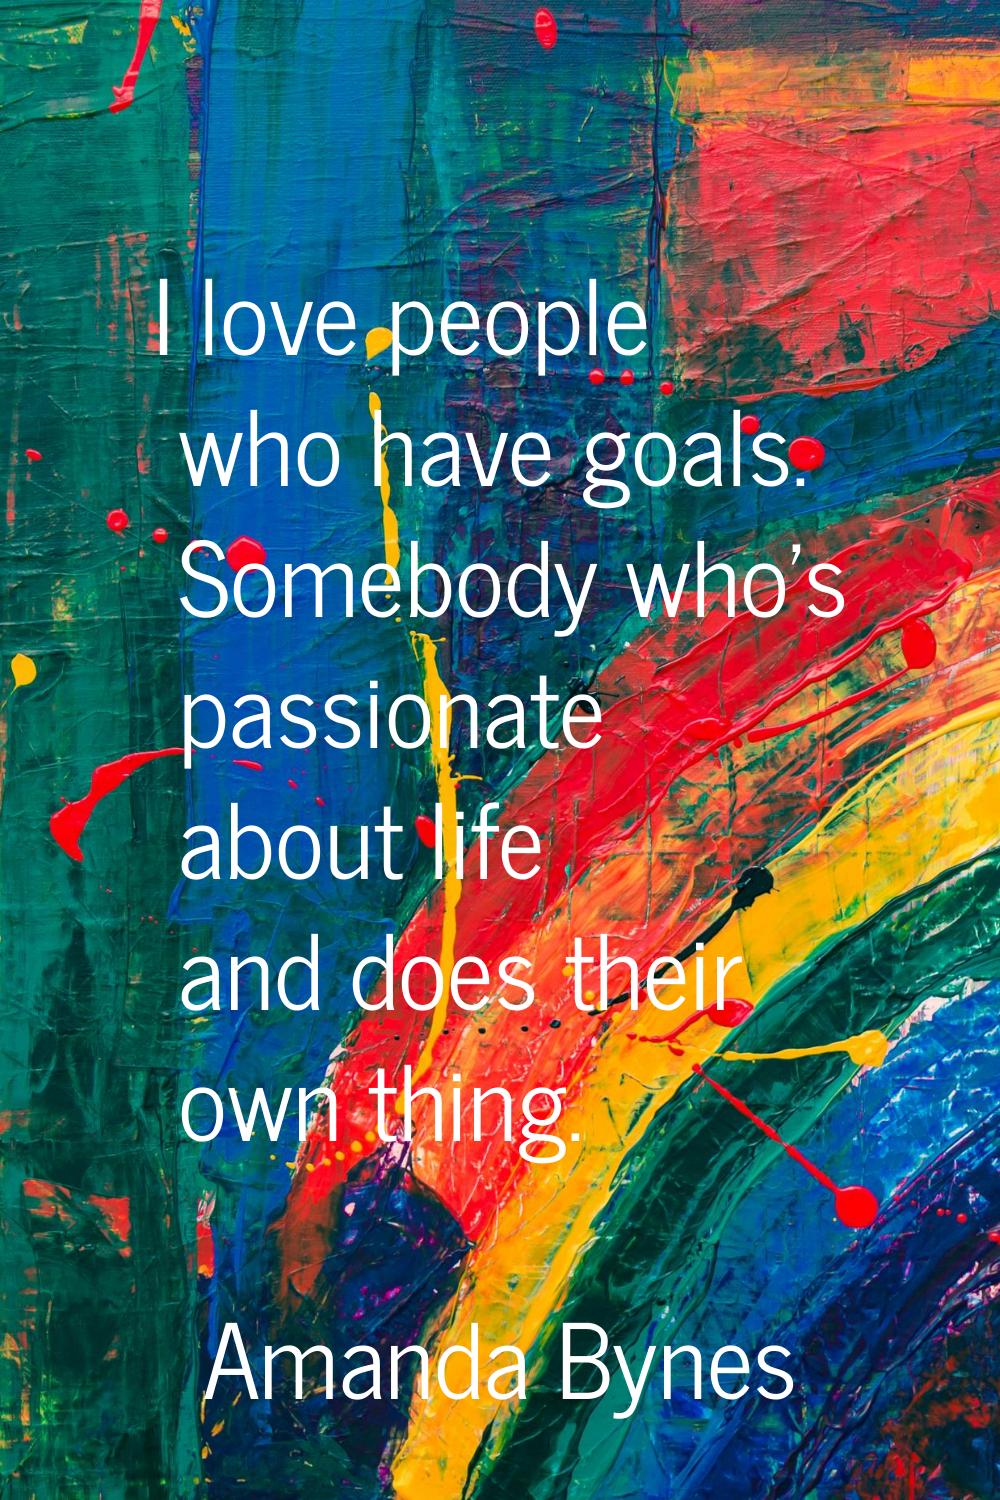 I love people who have goals. Somebody who's passionate about life and does their own thing.